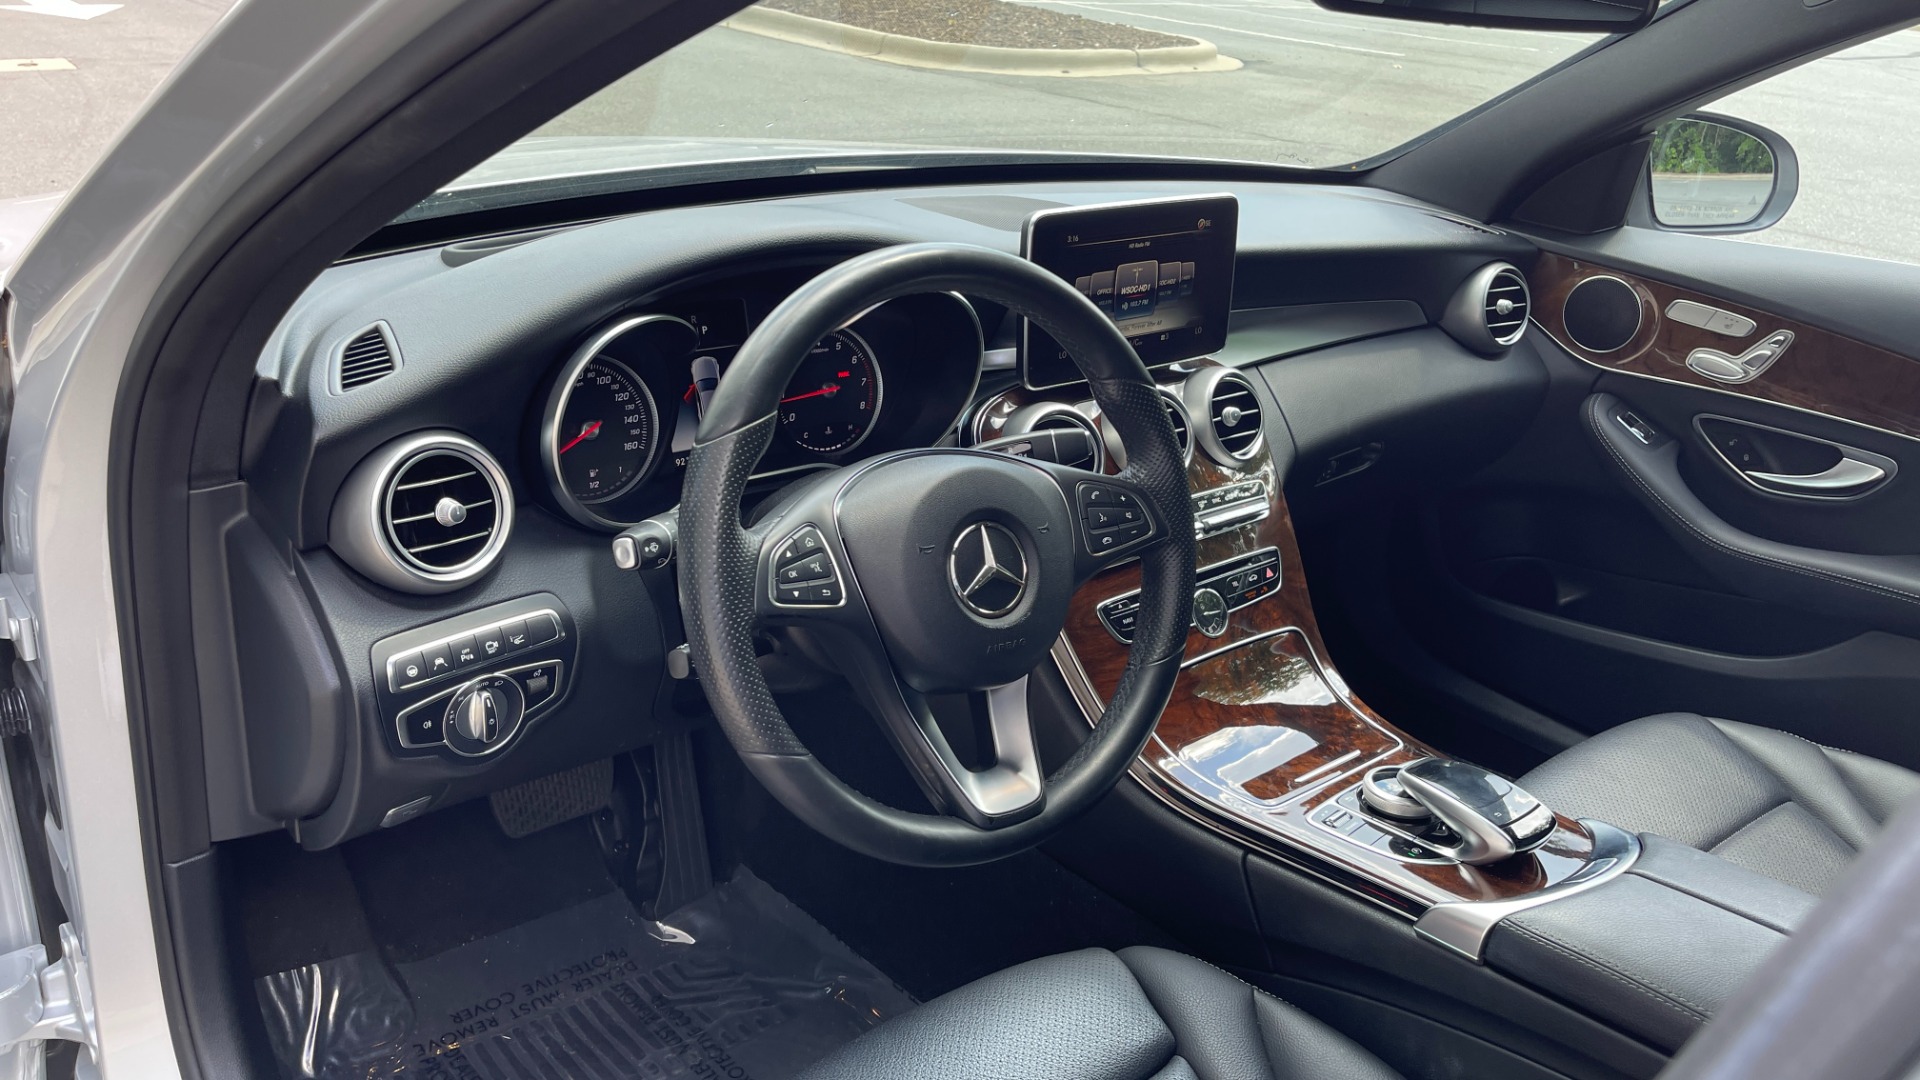 Used 2018 Mercedes-Benz C-Class C300 / PANORAMIC / HEADS UP DISPLAY / ADVANCED LIGHTING / PREMIUM ASSISTANC for sale $32,995 at Formula Imports in Charlotte NC 28227 9